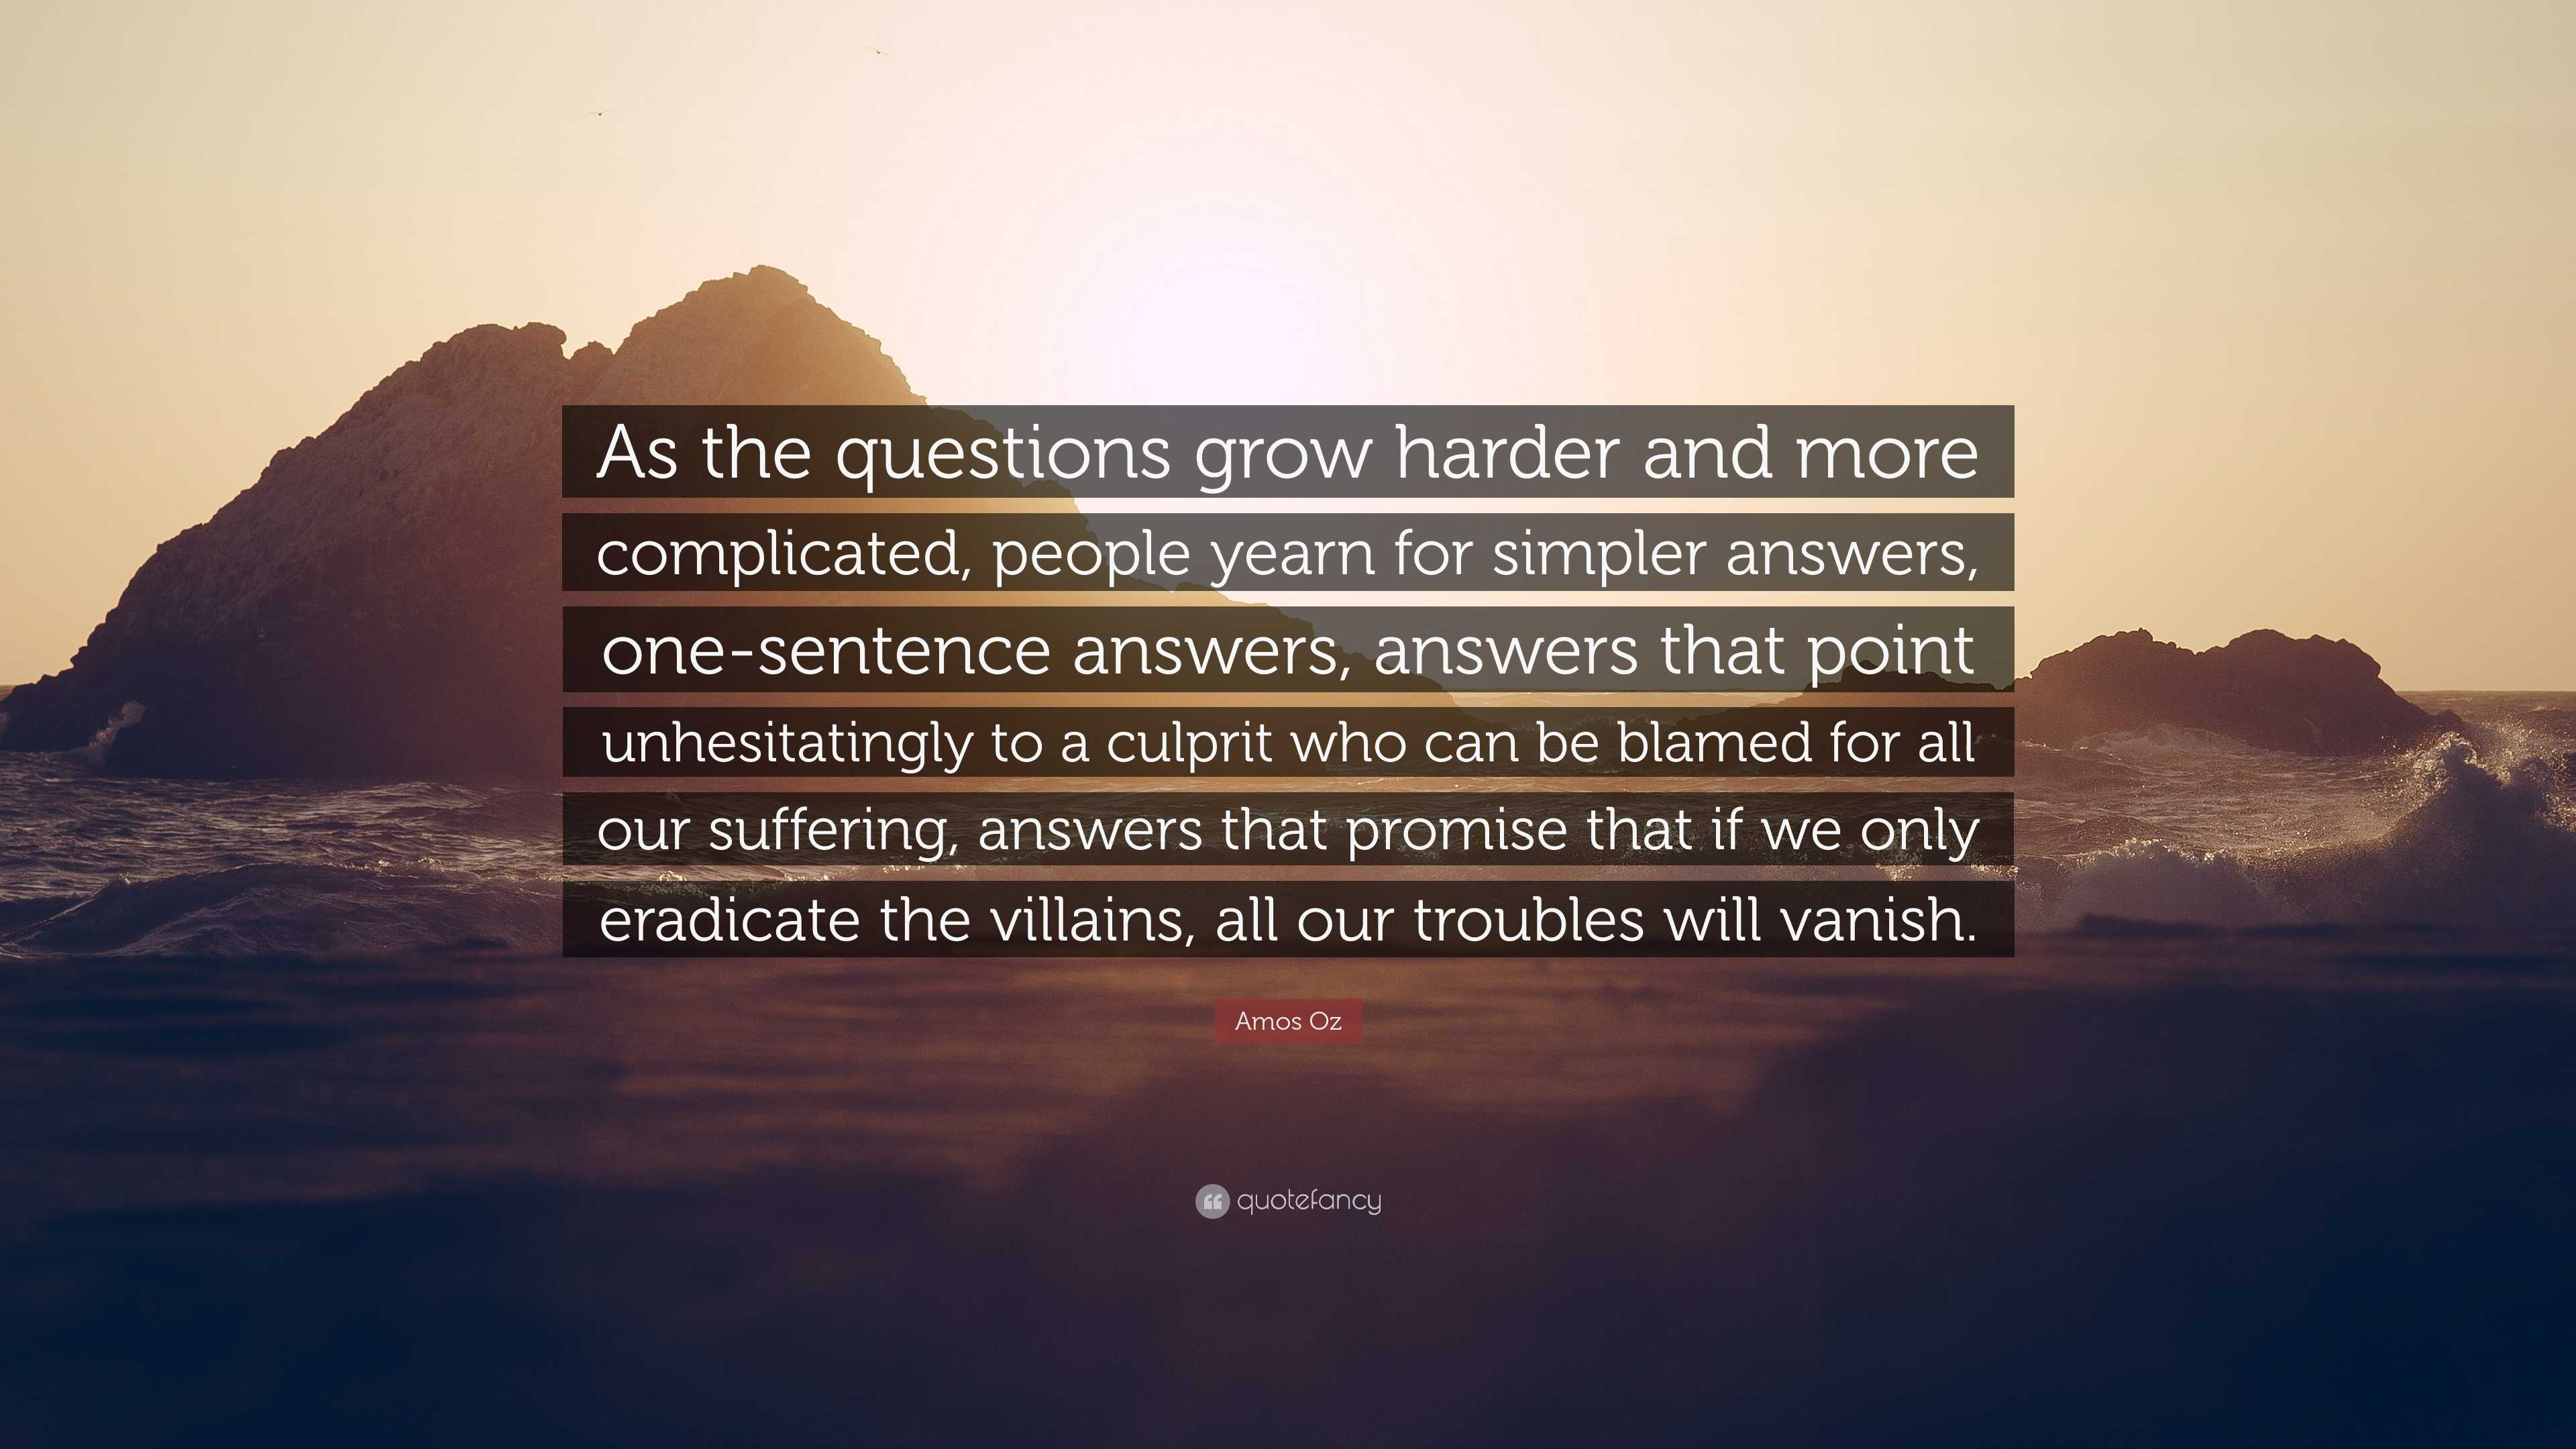 Amos Oz Quote: “As the questions grow harder and more complicated